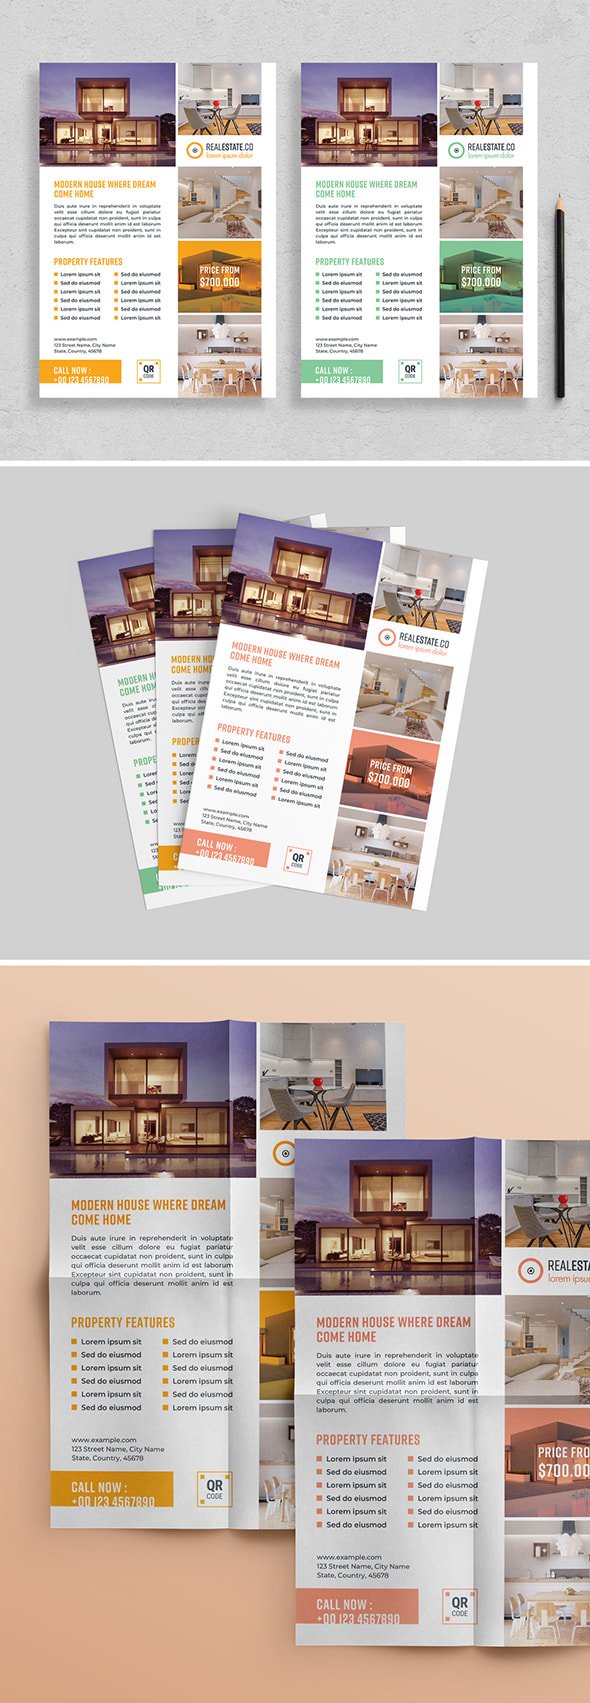 AdobeStock - Flyer Layout with Colorful Accents - 313873227